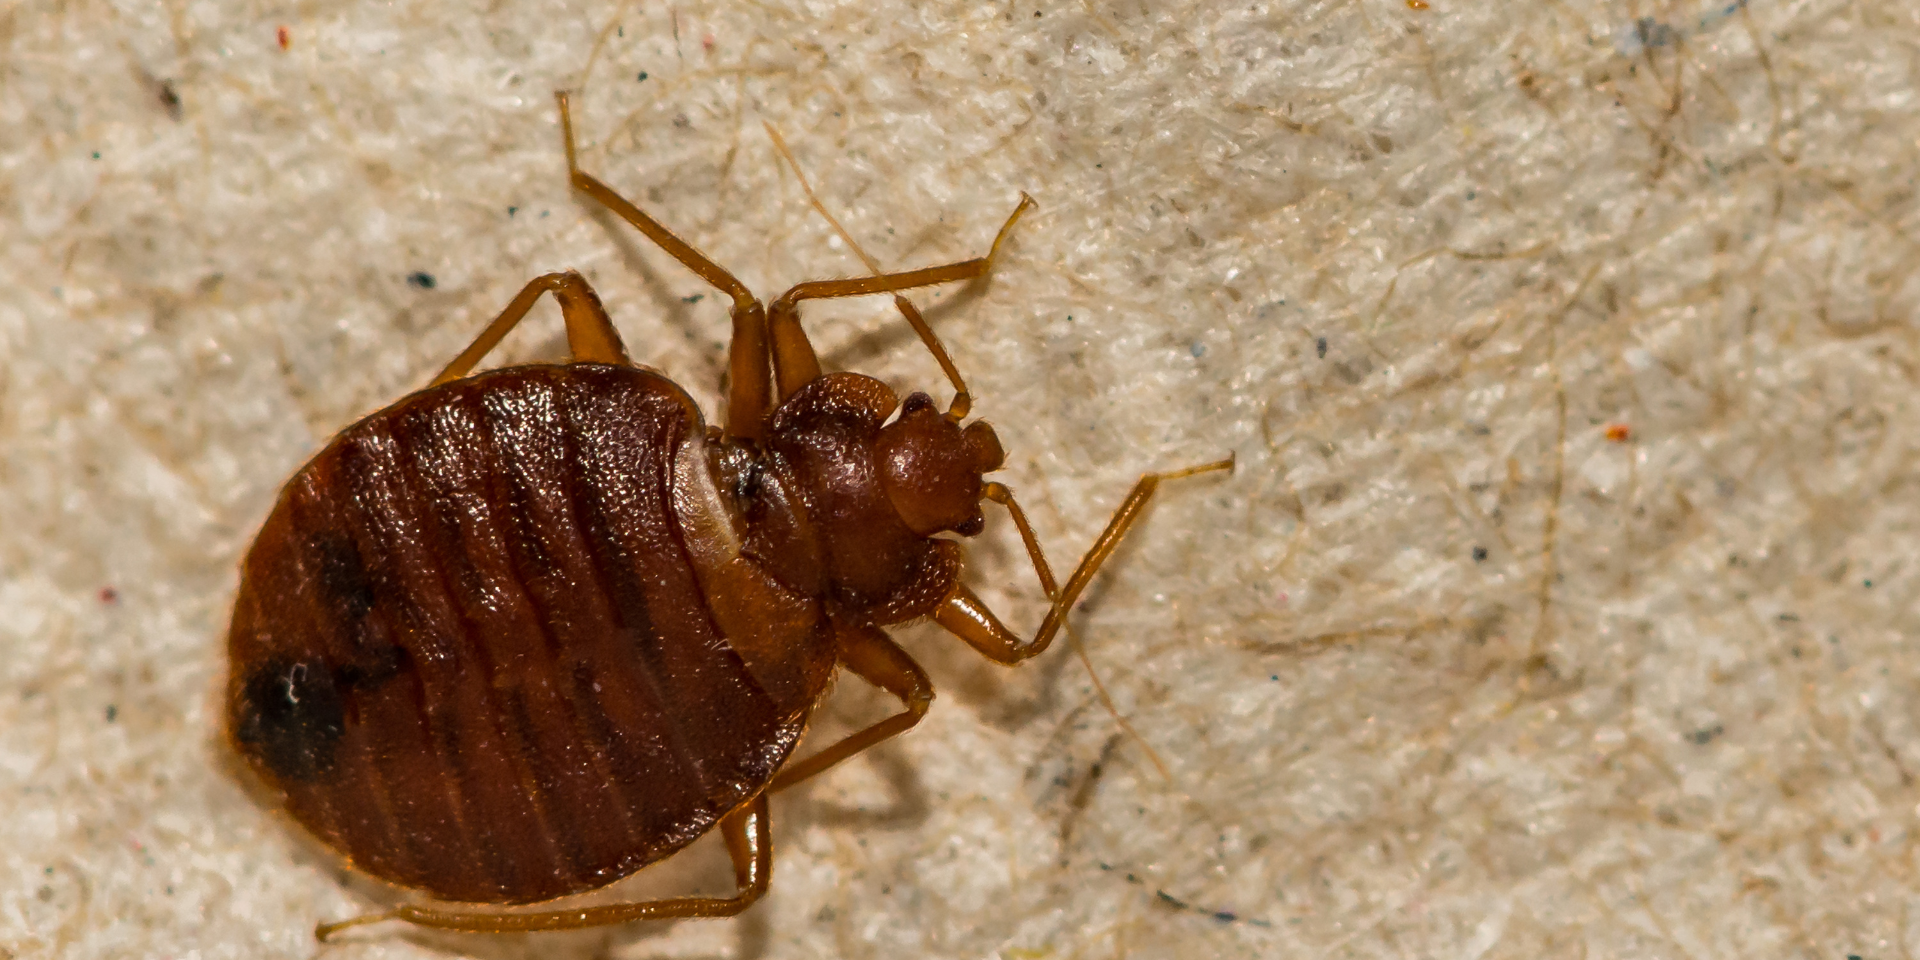 bed bugs can strike when you least expect them